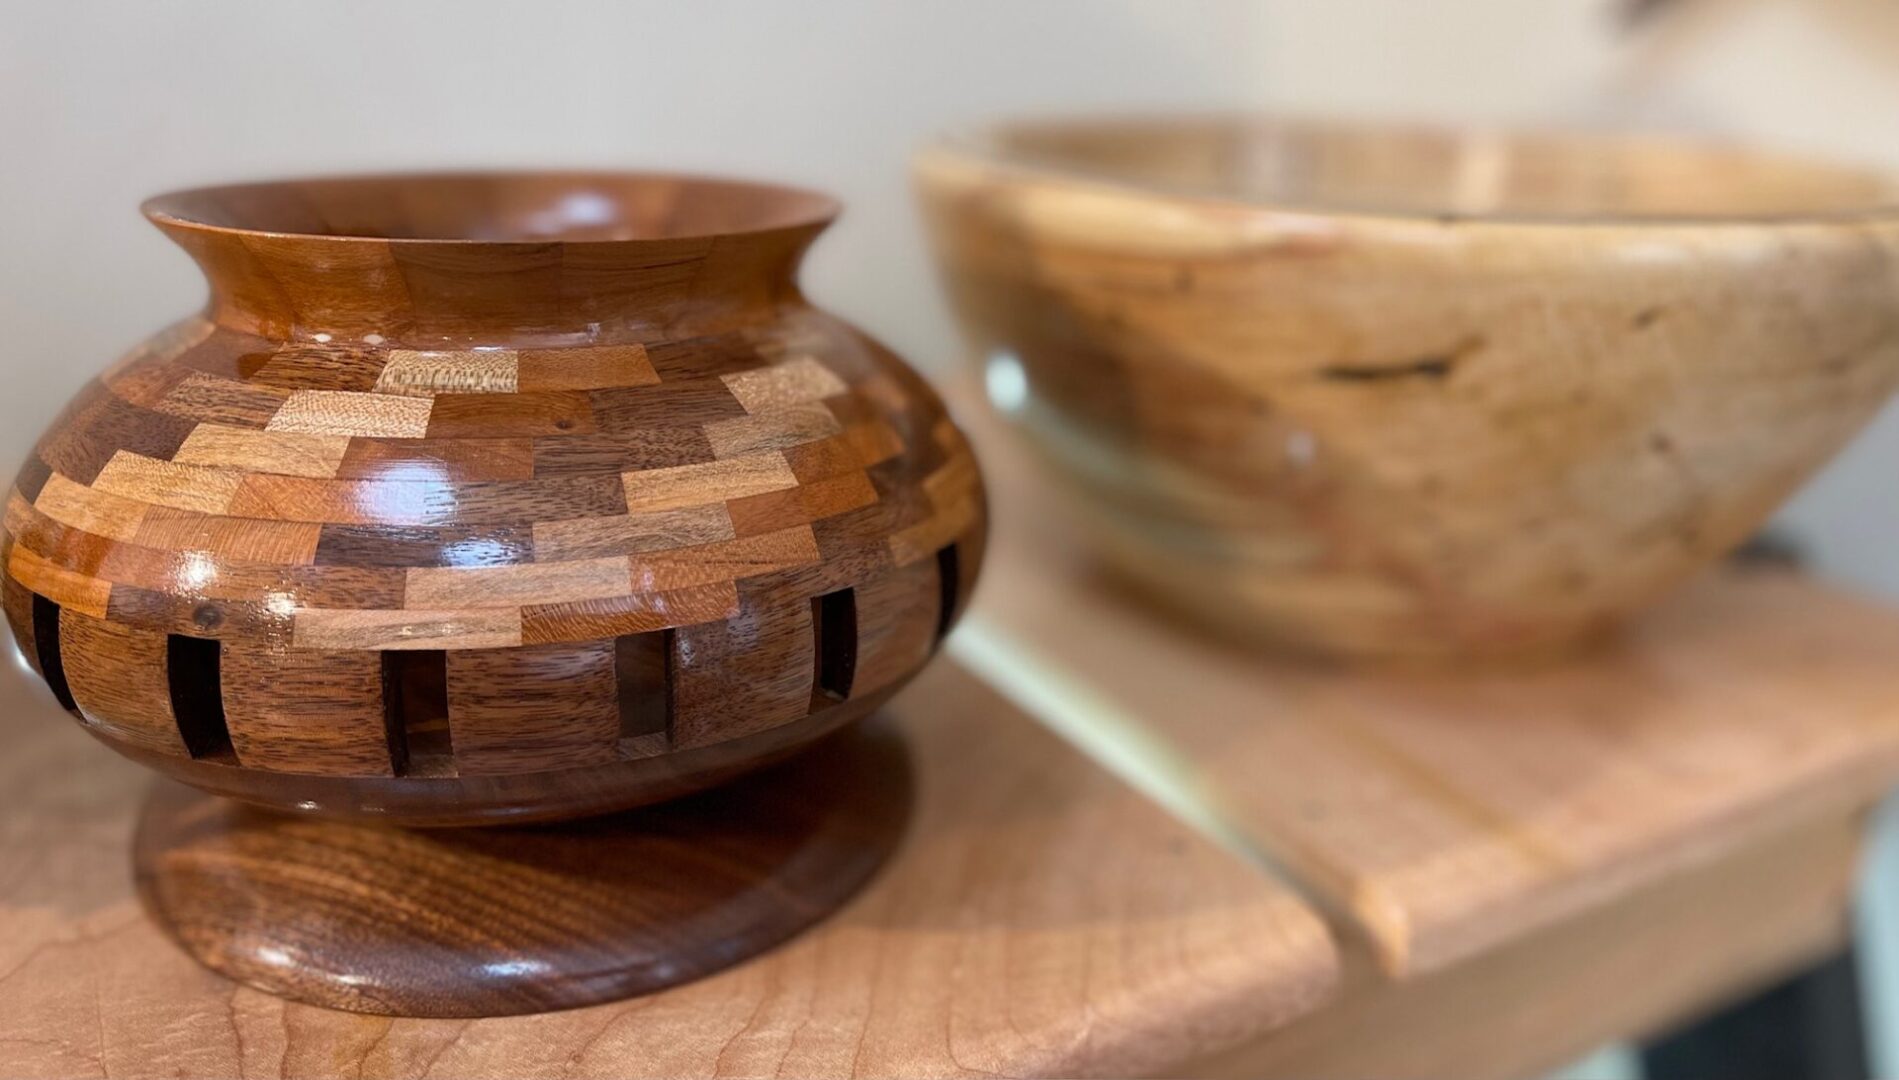 Two wooden bowls on top of a wooden table.